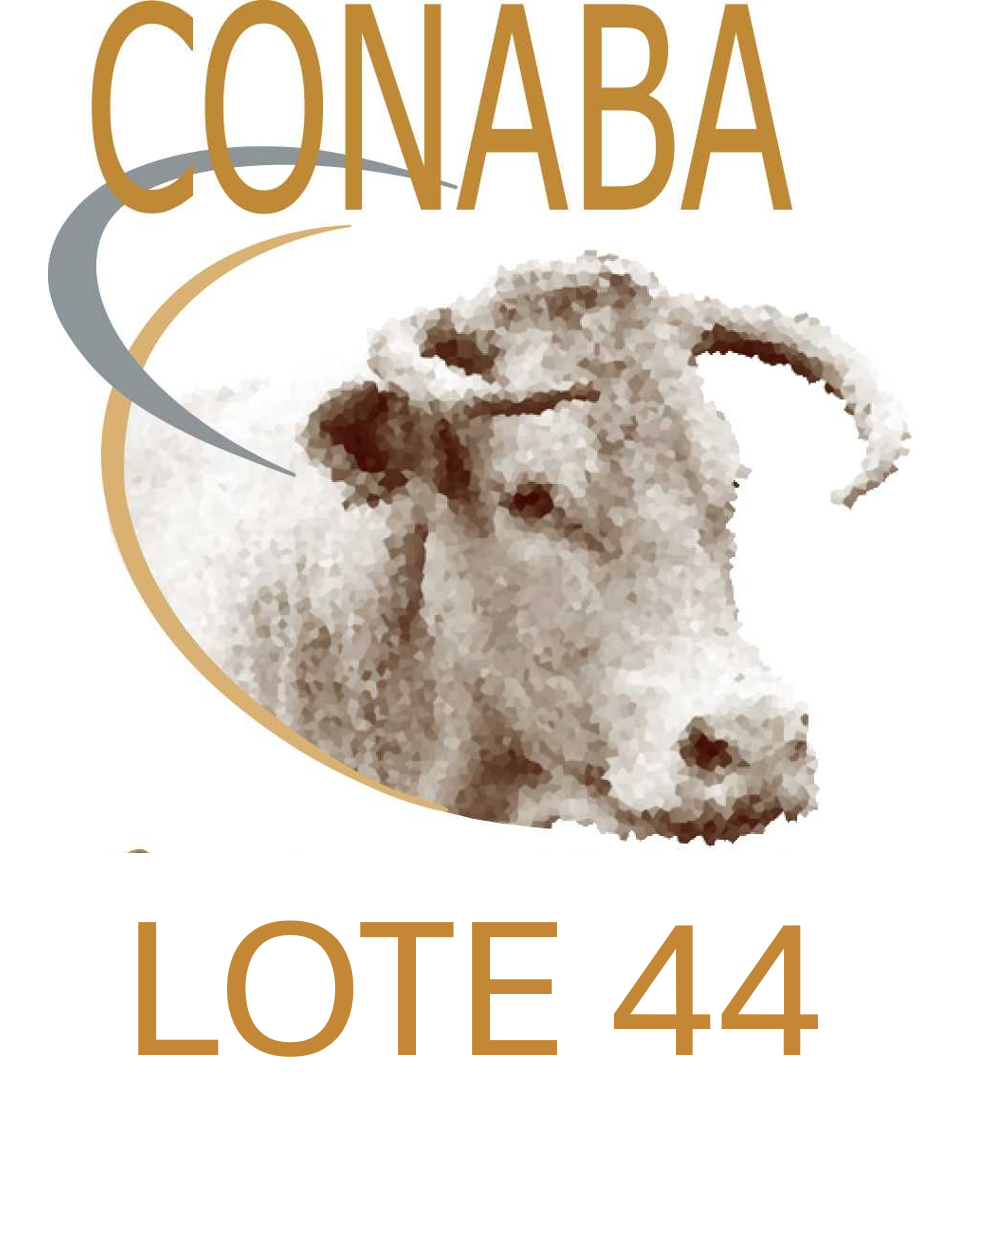 LOTE 44